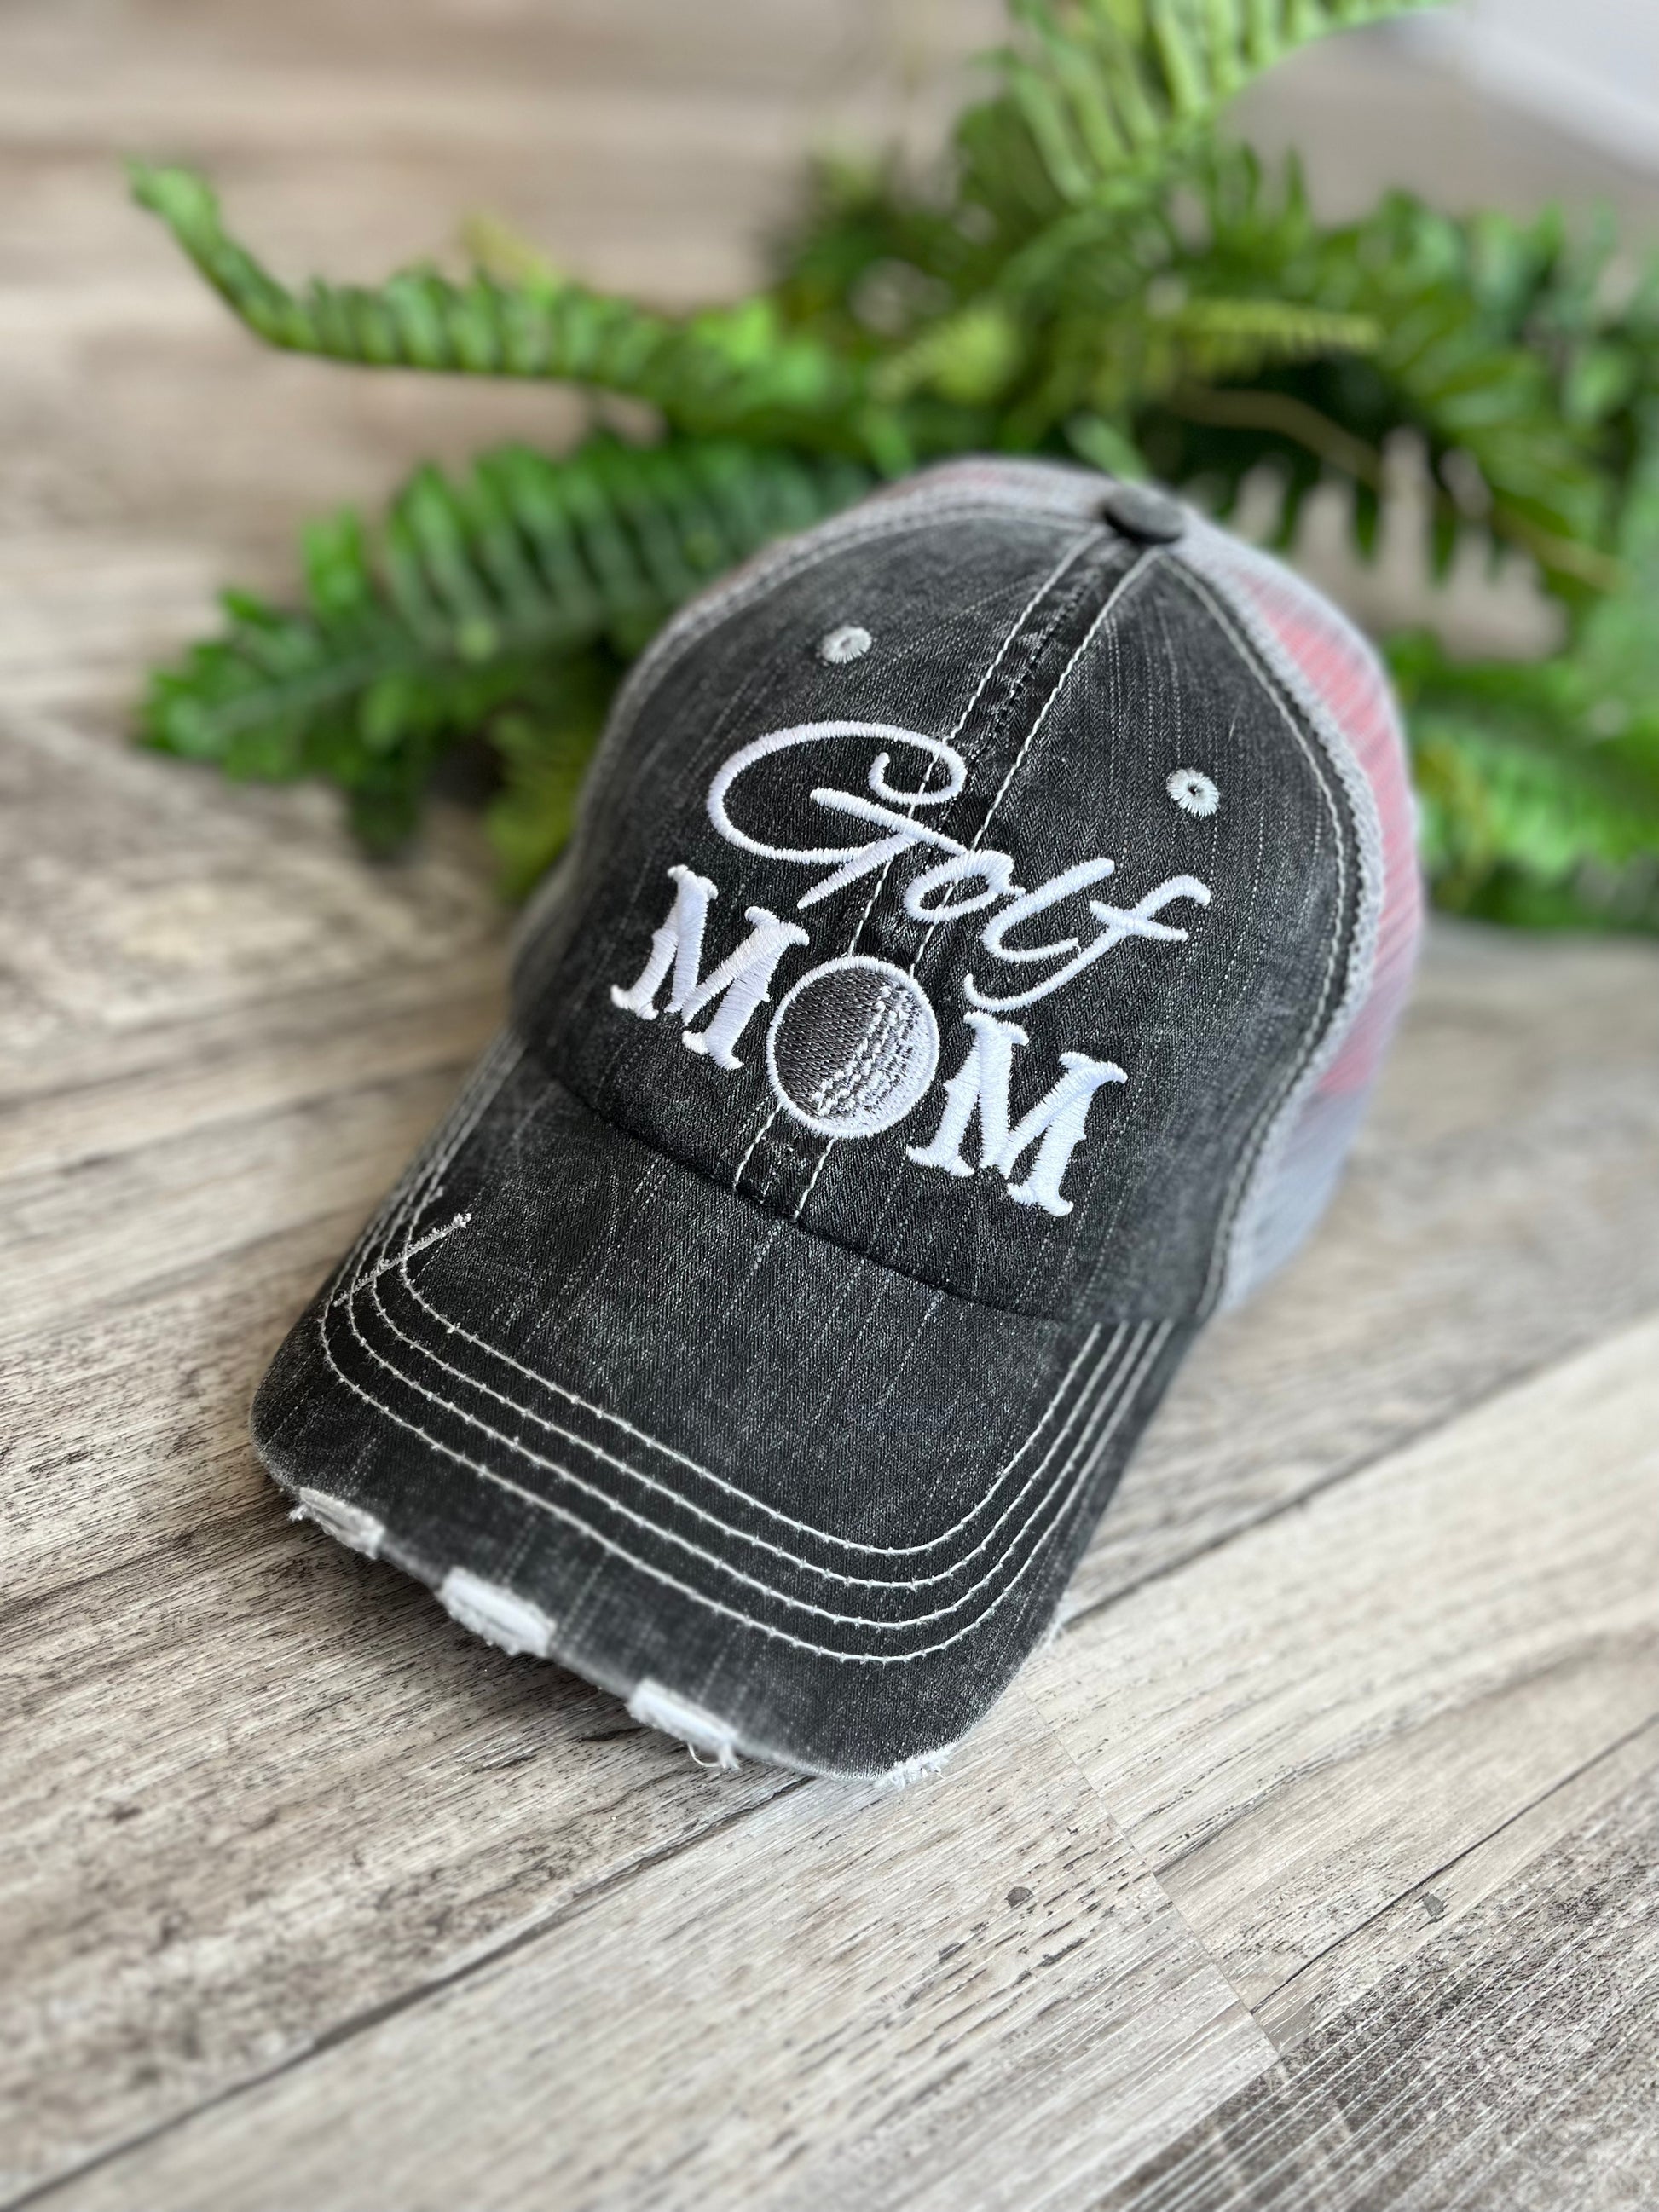 Golf hats Golf mom Golf hair dont care Embroidered personalized distressed trucker caps CUSTOMIZE name numbers BLING - Stacy's Pink Martini Boutique